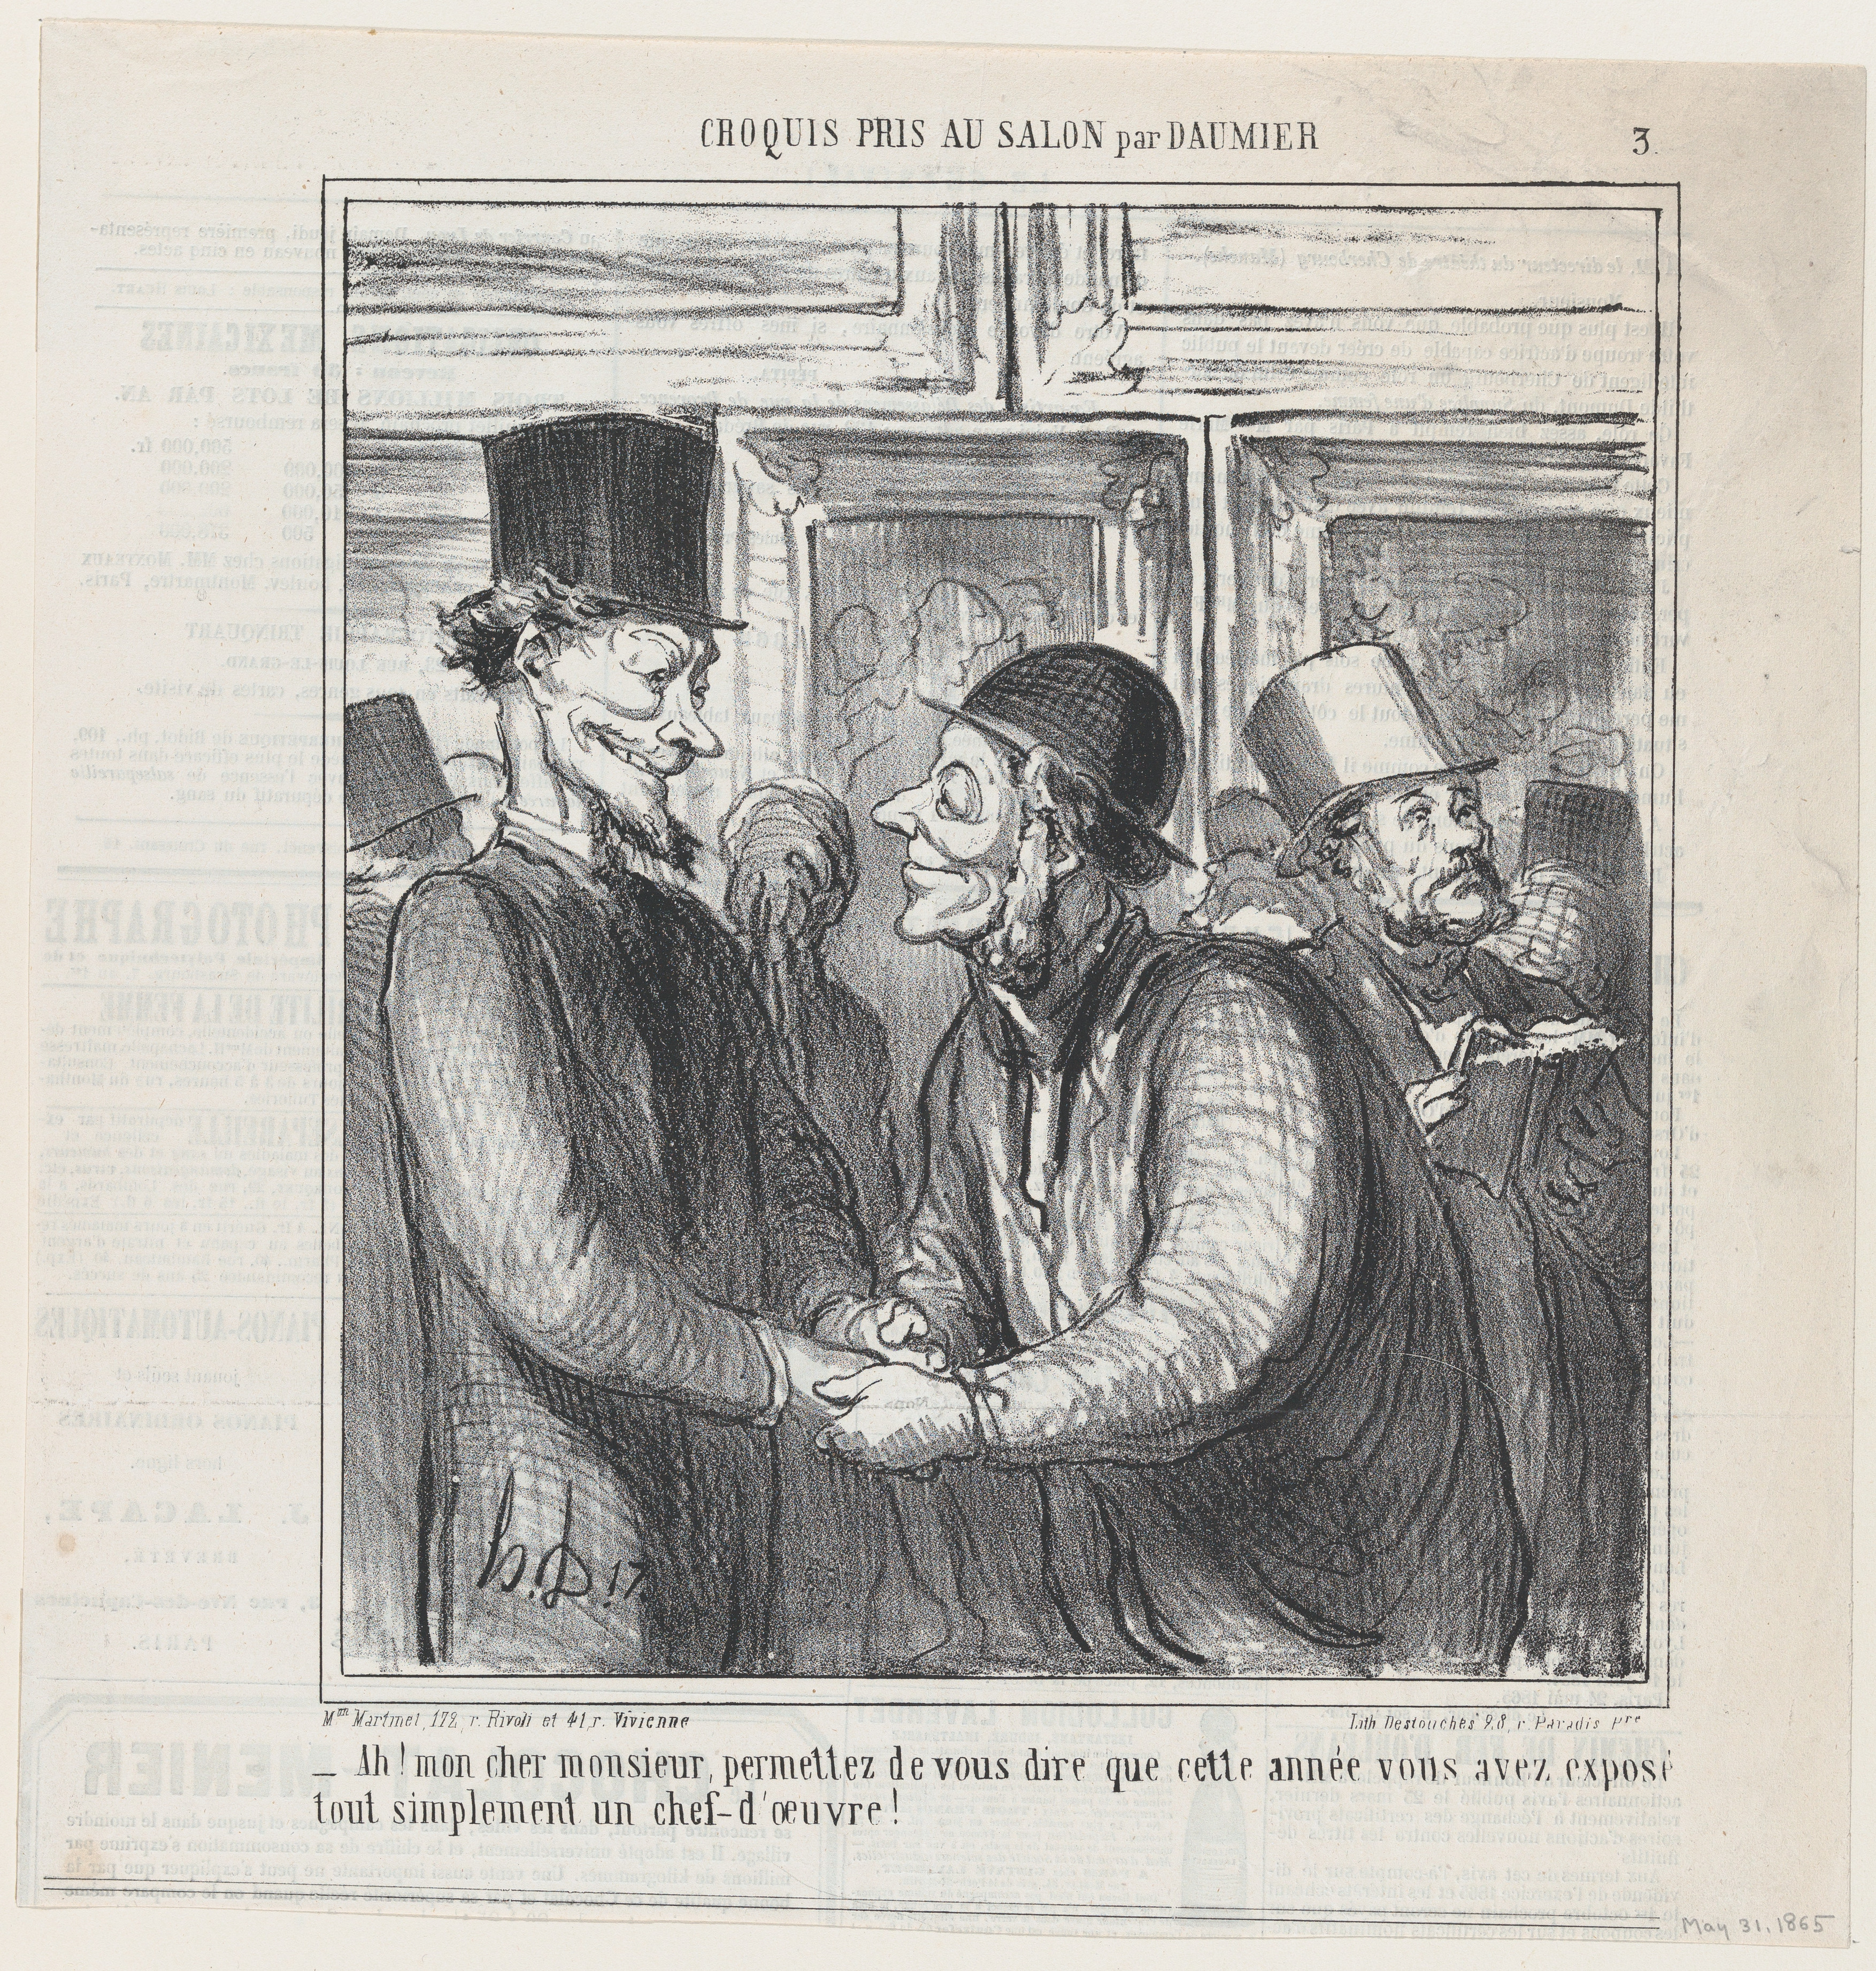 Honoré Daumier | Ah, tell May allow simply a the year sir, this exhibited dear masterpiece, you Le from you in me from my have \'Sketches quite published Charivari, that Salon,\' to